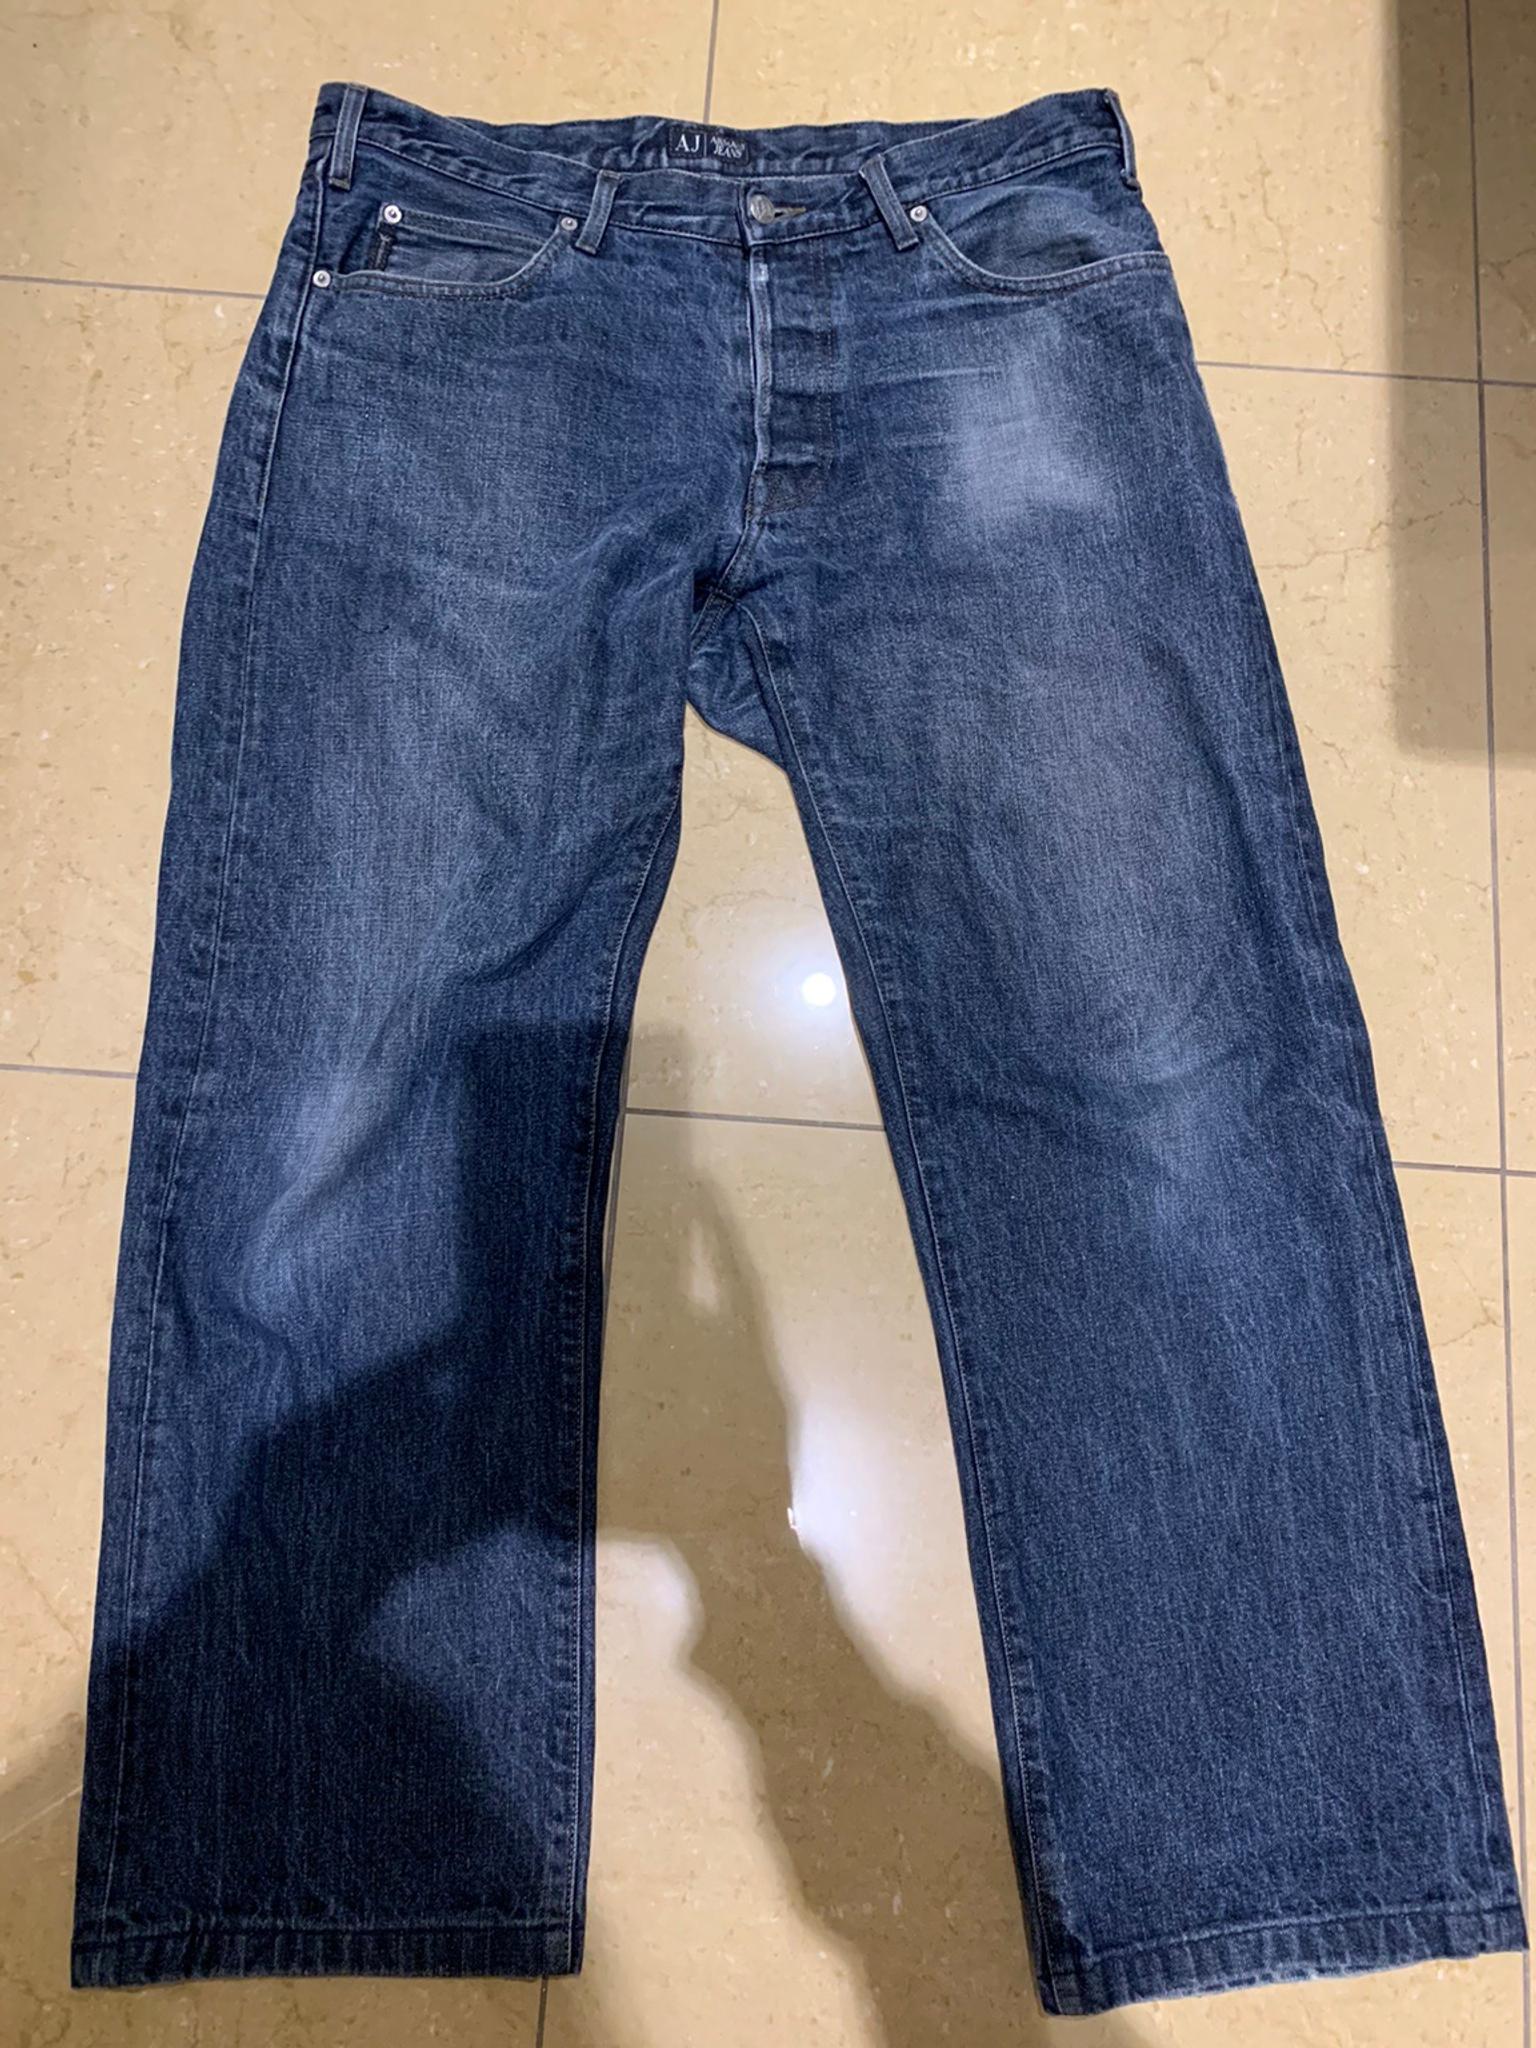 38 29 jeans